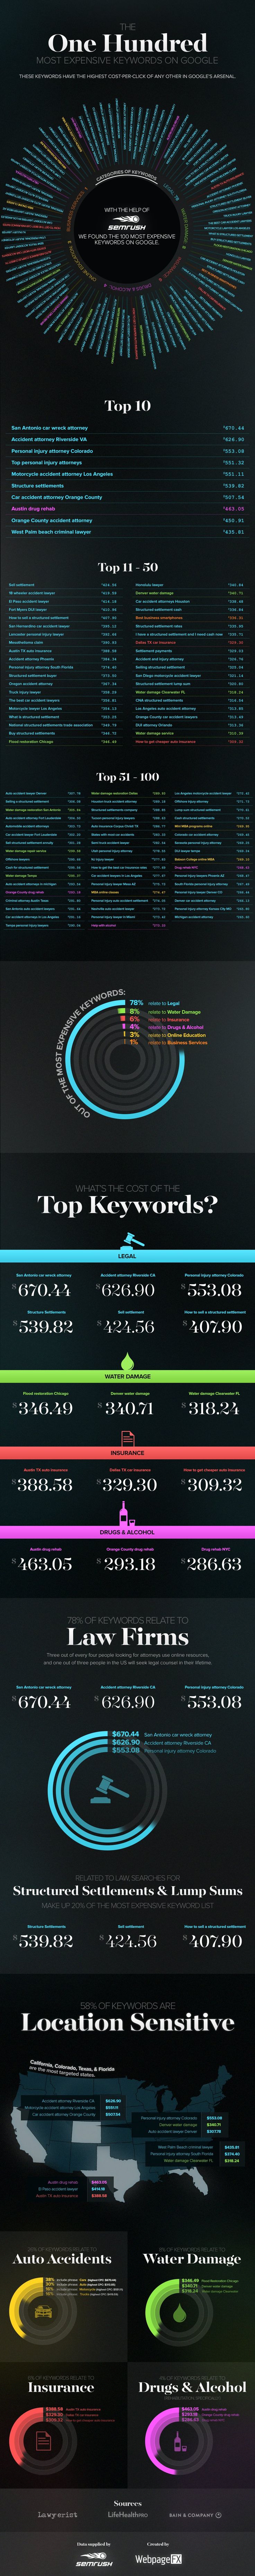 Advertising-Infographics-The-Most-Expensive-Key-Words-on-Google-Search Advertising Infographics : The Most Expensive Key Words on Google Search